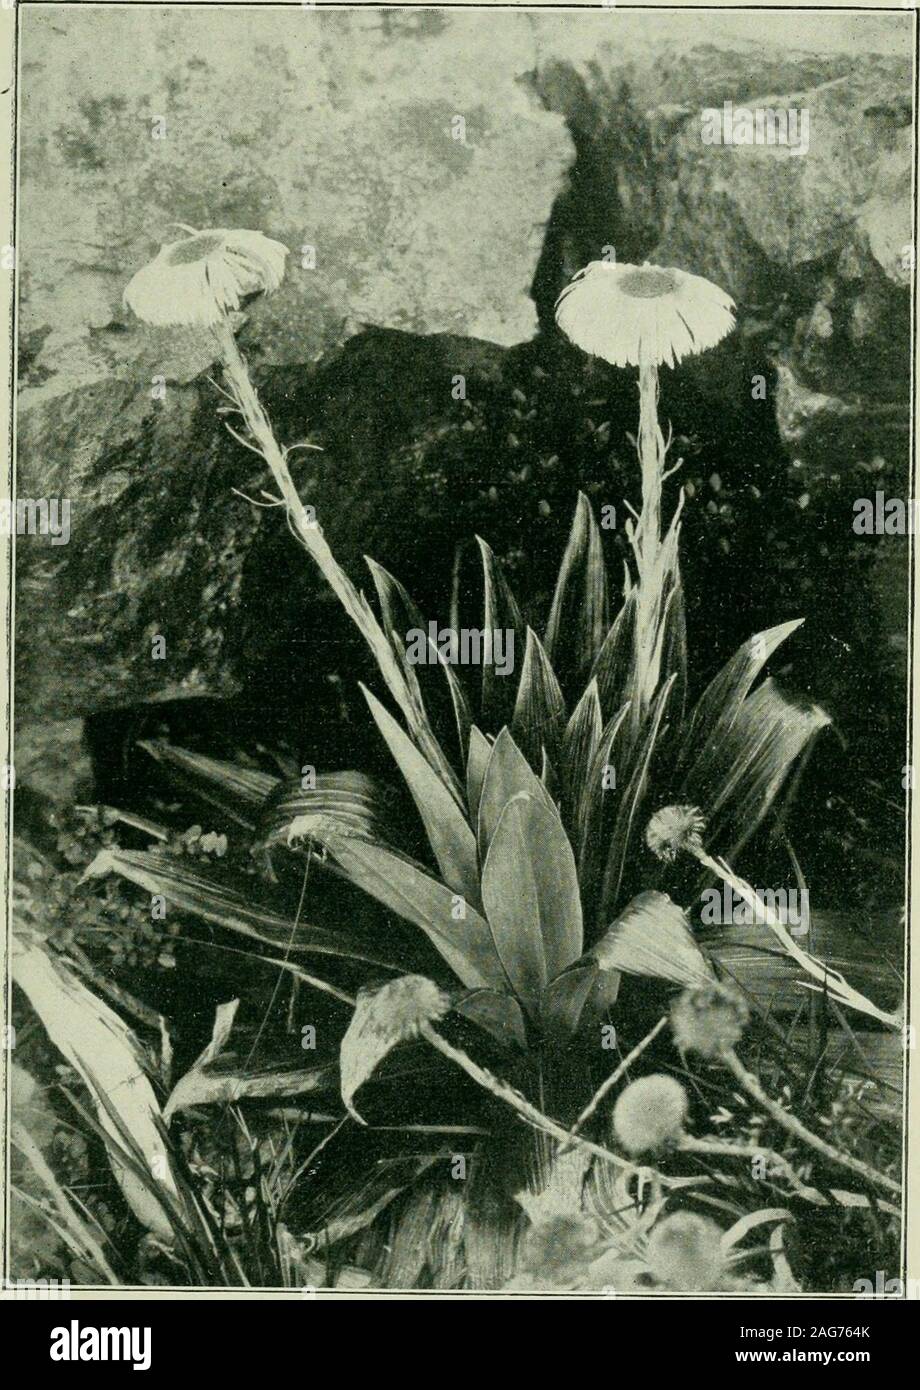 . Plants of New Zealand. cottonybelow. Head J in.-l|in. broad, bracts often black at the tips. Achene glabrousor silky. Both islands ; Stewart Island. Fl. Dec.-March. Celmisia vernicosa {The Varnished Celmisia). Leaves in rosettes, sessile, 1 in.-4 in. long, ^ in.-J in. broad, thick, rigid,sometimes slightly serrate at the tip. Flower-stem 1 in.-8 in. high, with broadbracts. Disk-florets purple, rays white. Achene roughly hairy. Very shiningin all its parts. Auckland and Campbell Islands. Fl. Nov.-Dec. Closely allied to the genus Olearia, and differing from itchiefly in habit, is the genus Cel Stock Photo